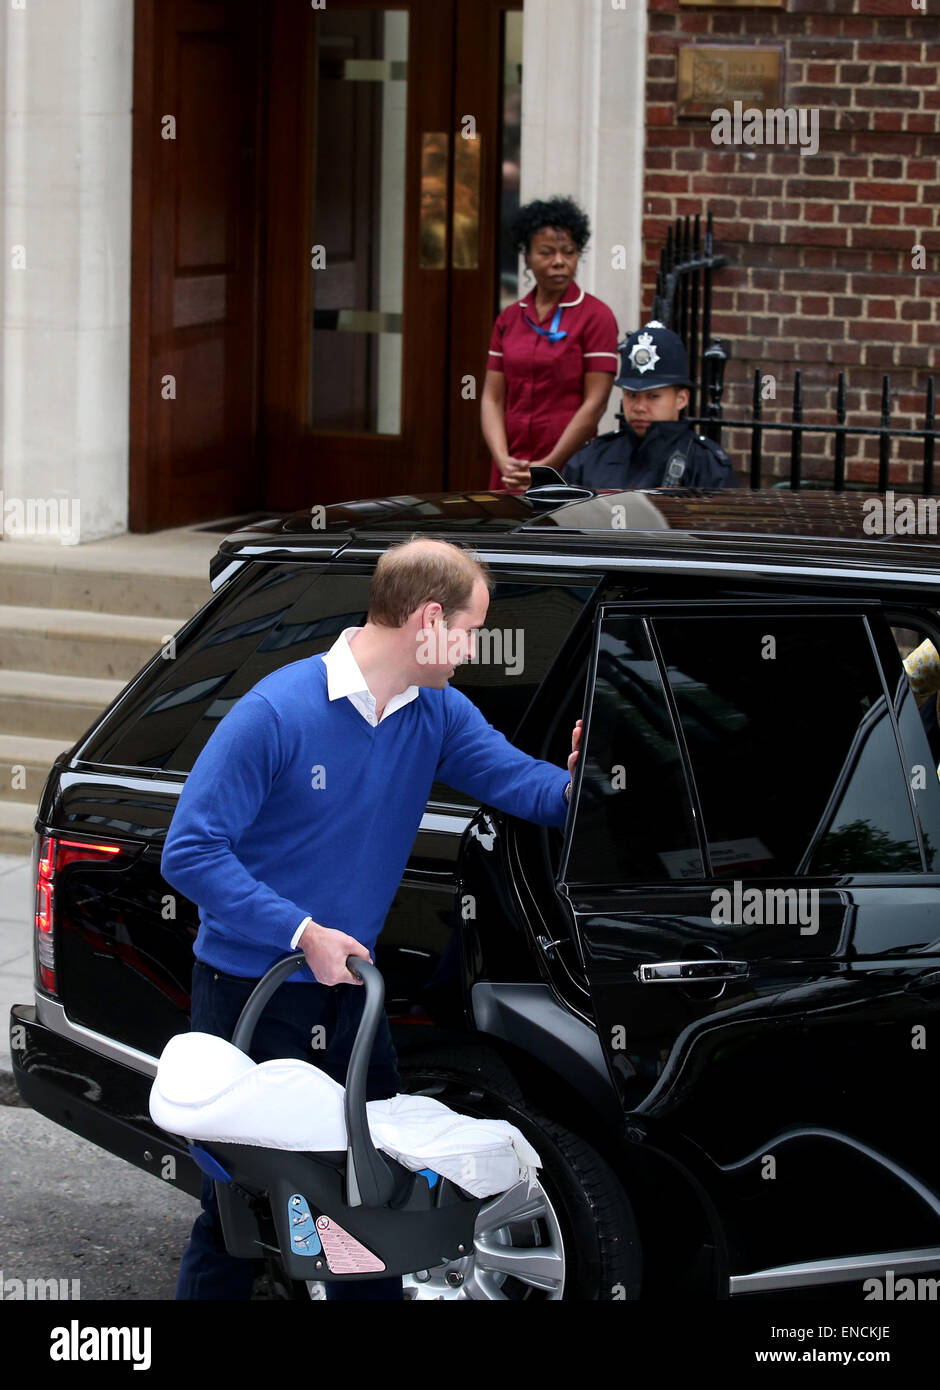 London, St. Mary's Hospital in London. 2nd May, 2015. Prince William, Duke of Cambridge, carries the newborn baby girl on a car outside St. Mary's Hospital in London, on May 2, 2015. The newborn baby girl made her first appearance to the public with the Duke of Cambridge and the Duchess outside St. Mary's Hospital on Saturday evening. Credit:  Han Yan/Xinhua/Alamy Live News Stock Photo